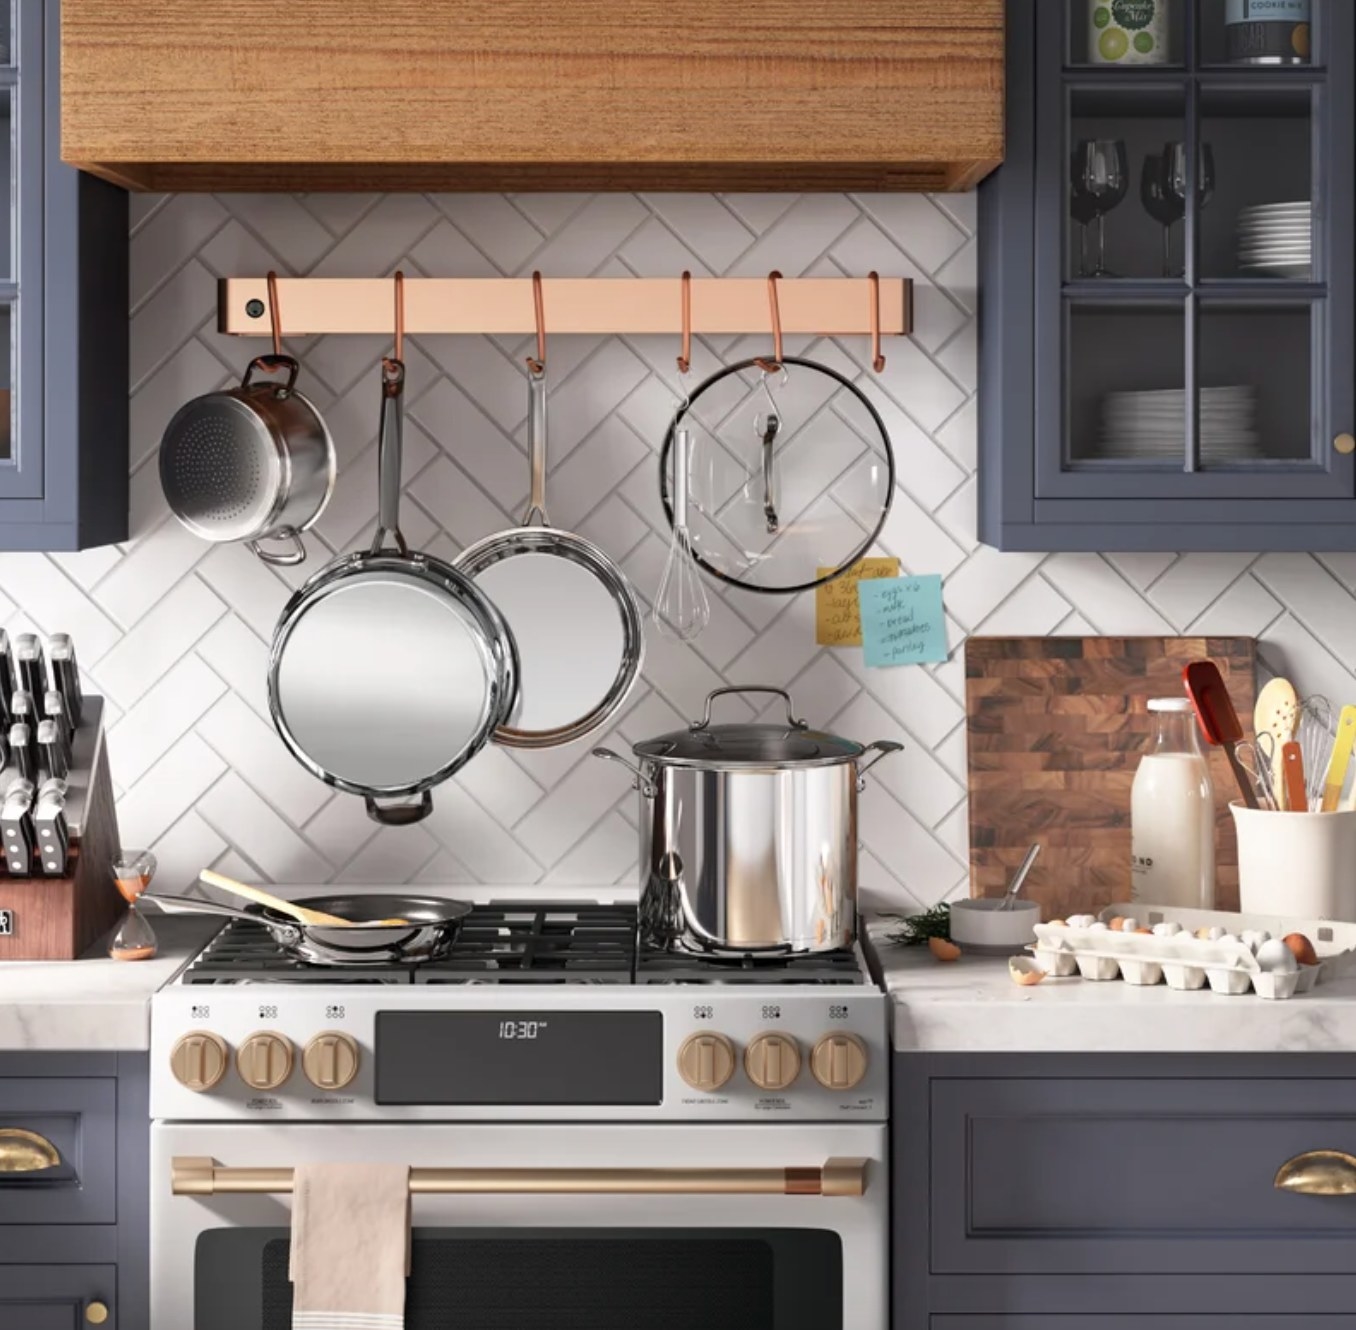 the silver pans and accessories in a decorated kitchen space